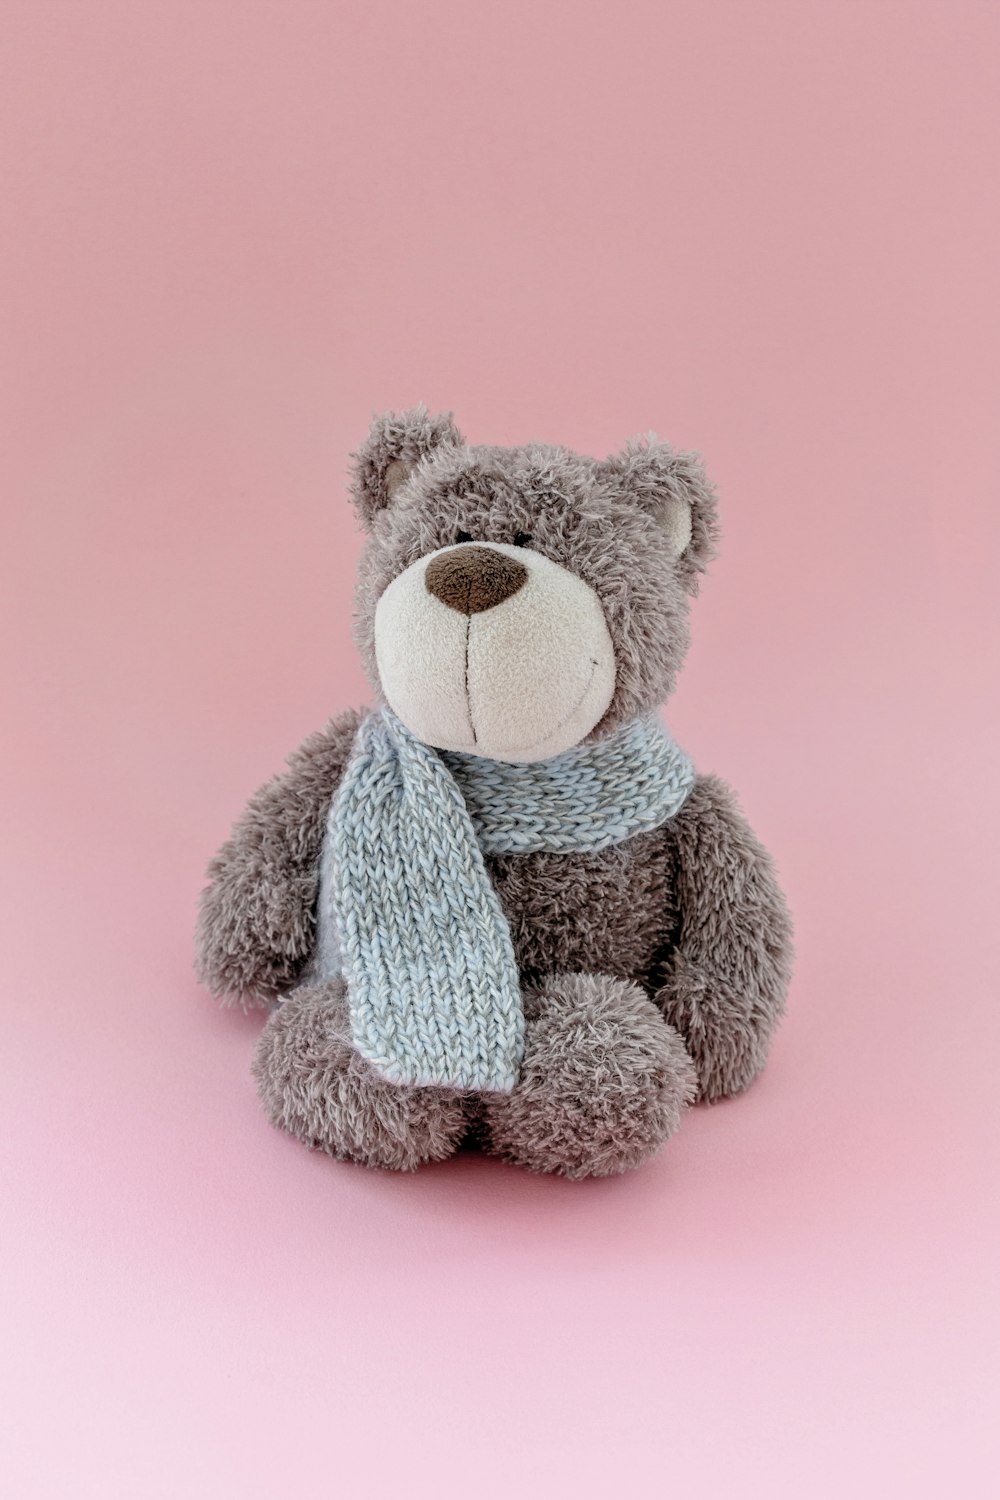 a gray teddy bear with a scarf around its neck